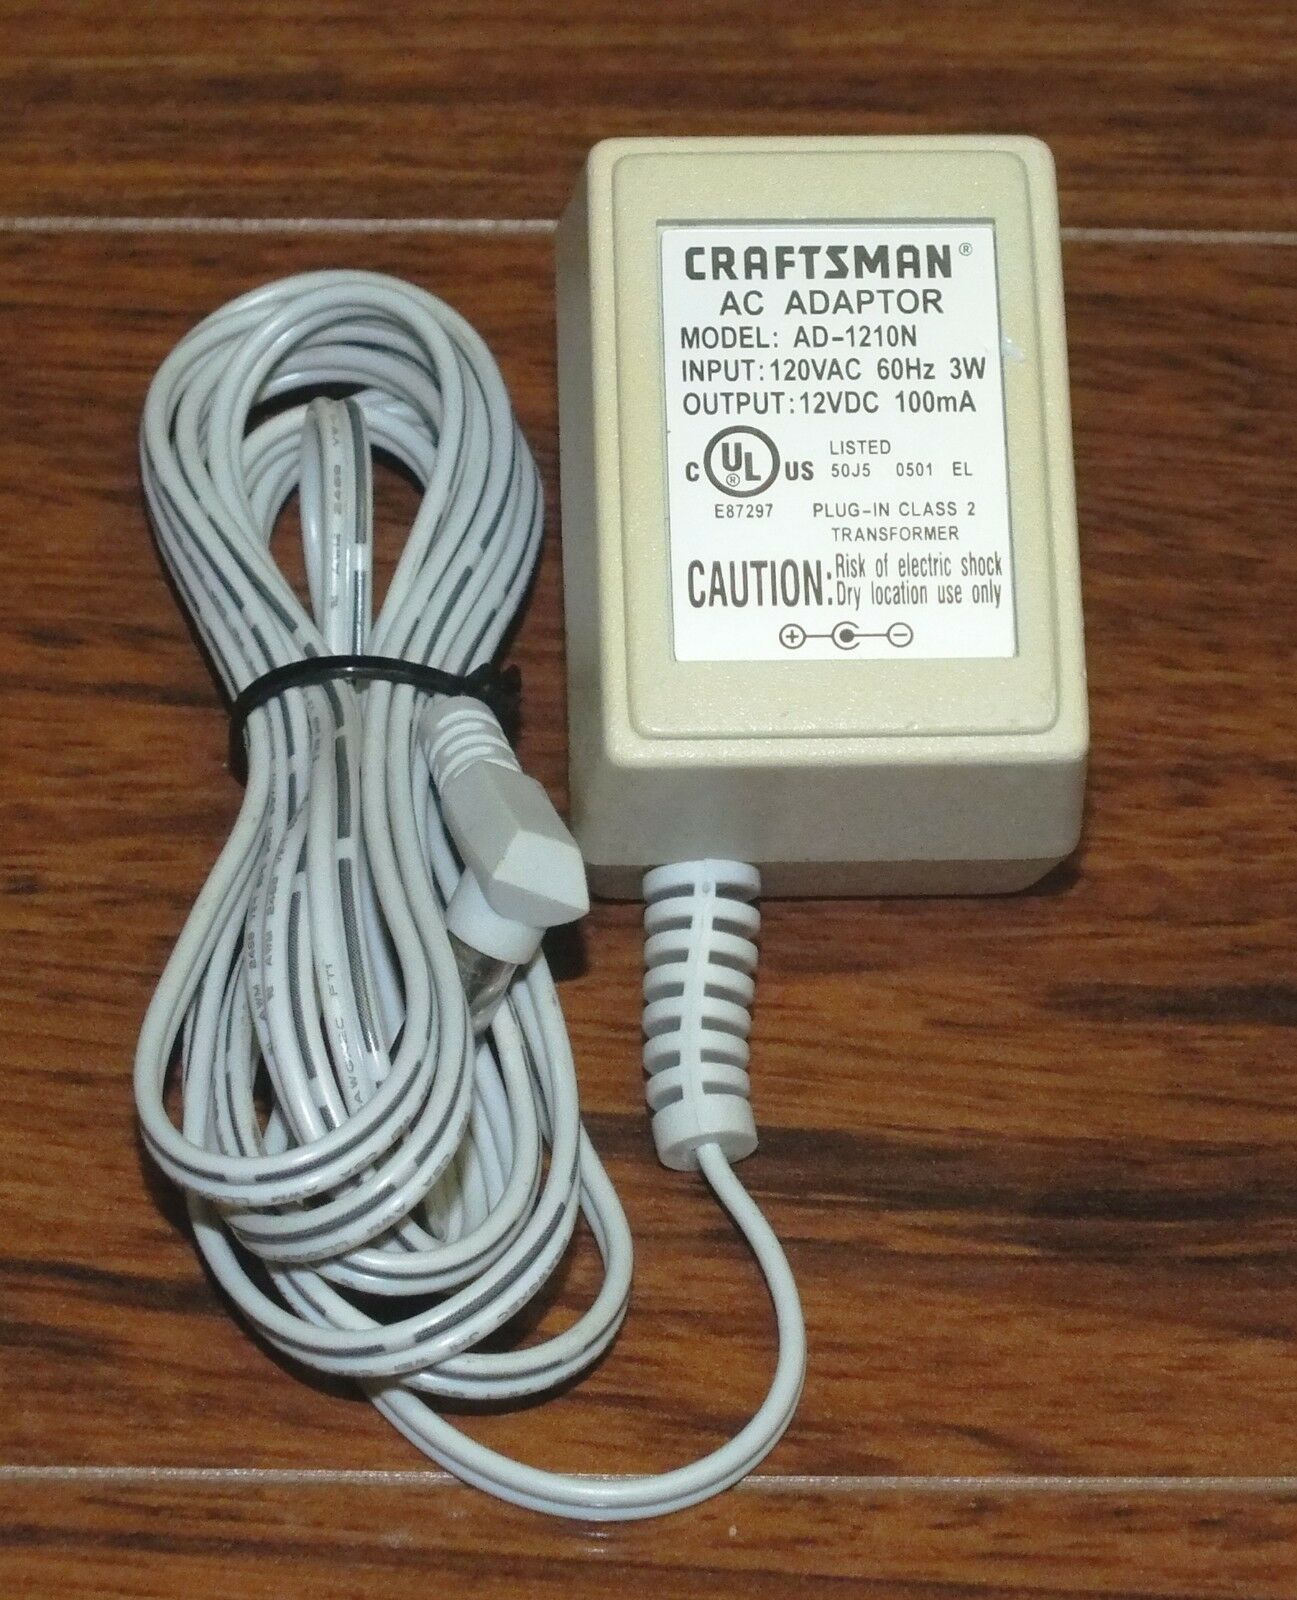 Craftsman (AD-1210N) AC Adaptor Plug In Class 2 Transformer Power Supply! 12VDC Country/Region of Manufacture: Unkno